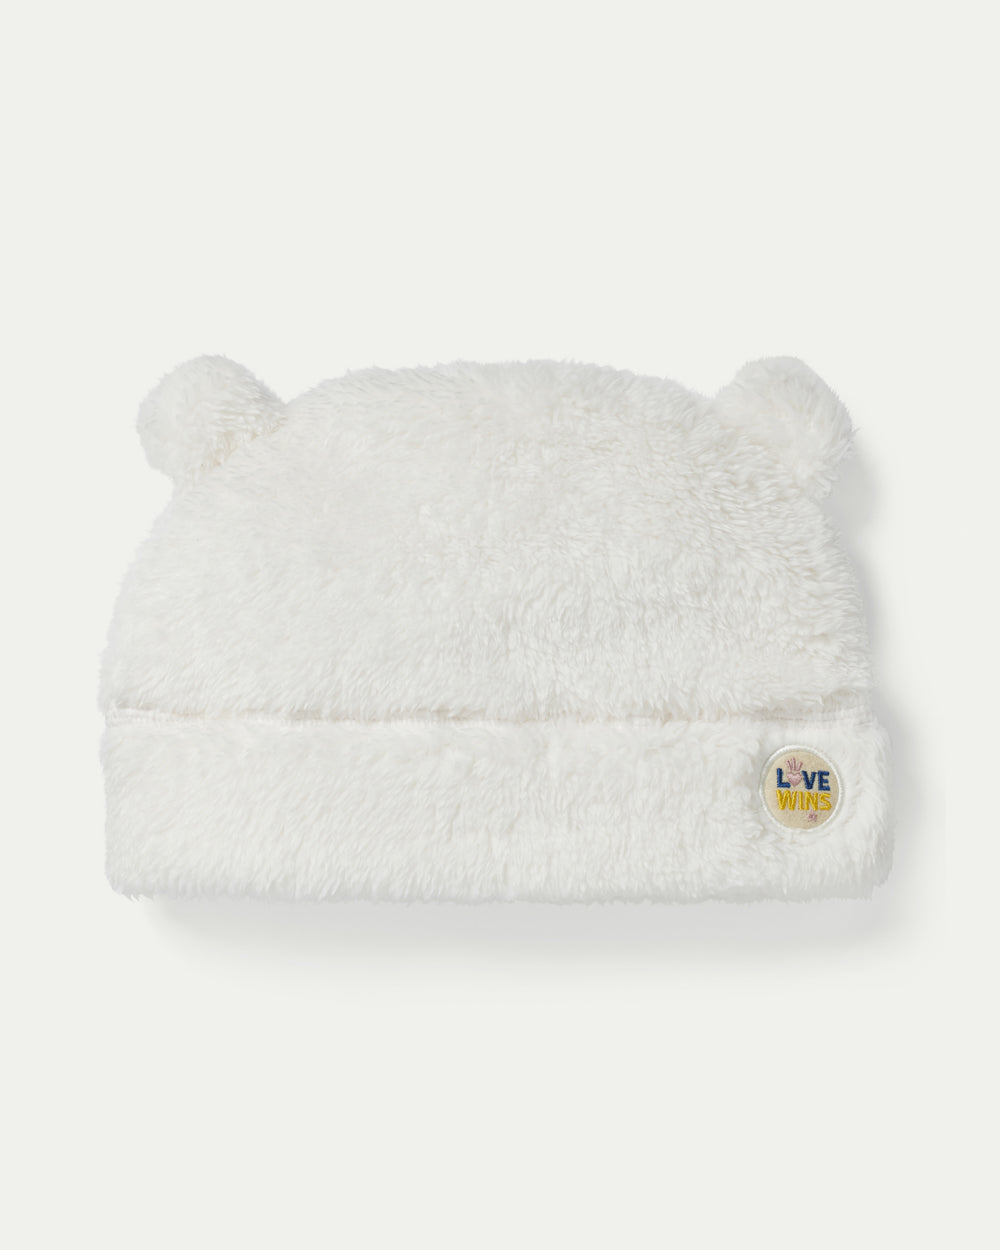 White Girls Recycled Fleece Hat - Small Stuff Accessories